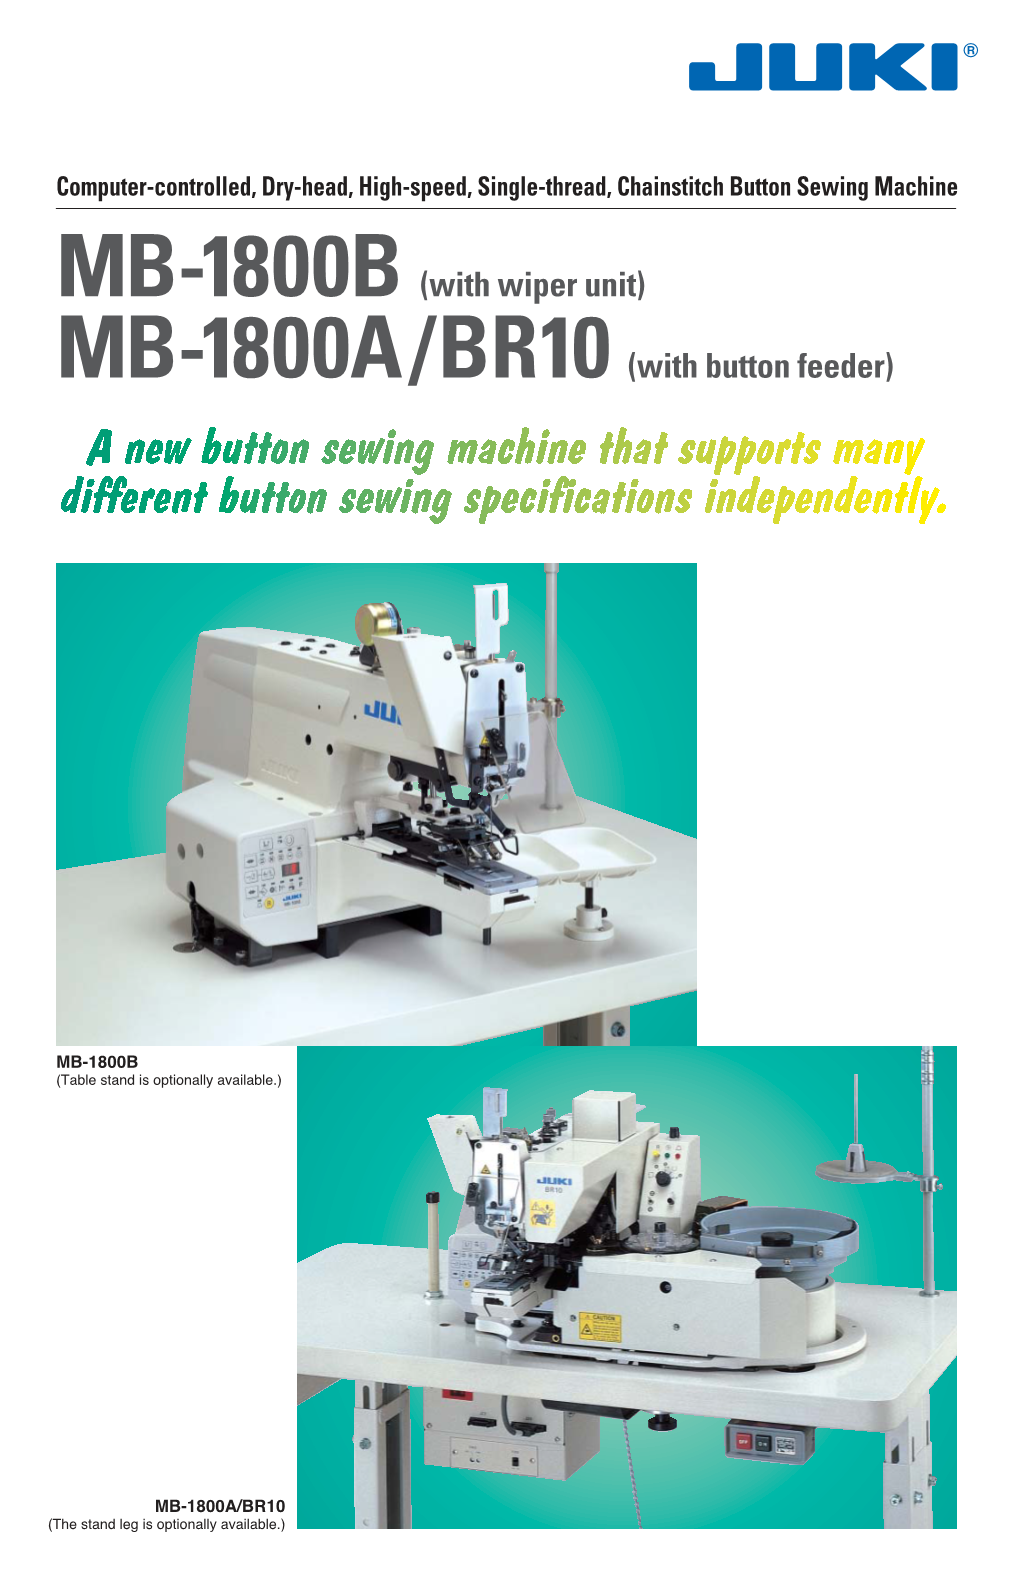 MB-1800B (With Wiper Unit) MB-1800A/BR10 (With Button Feeder)